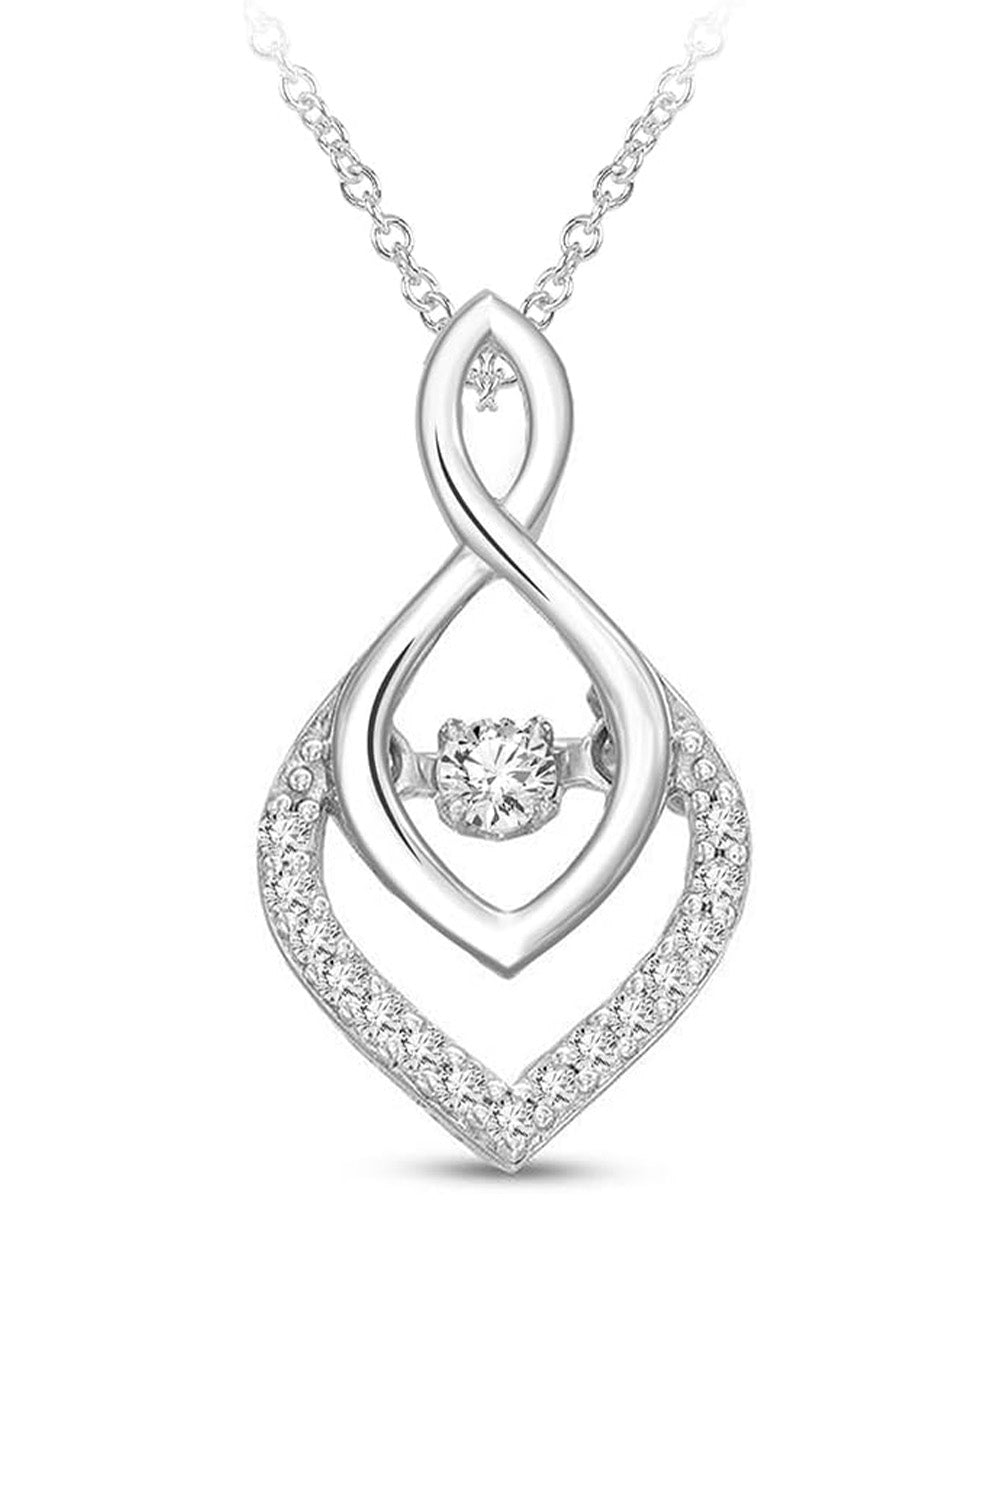 White Gold Color Infinity Flame Pendant Necklace, Pendant For Women